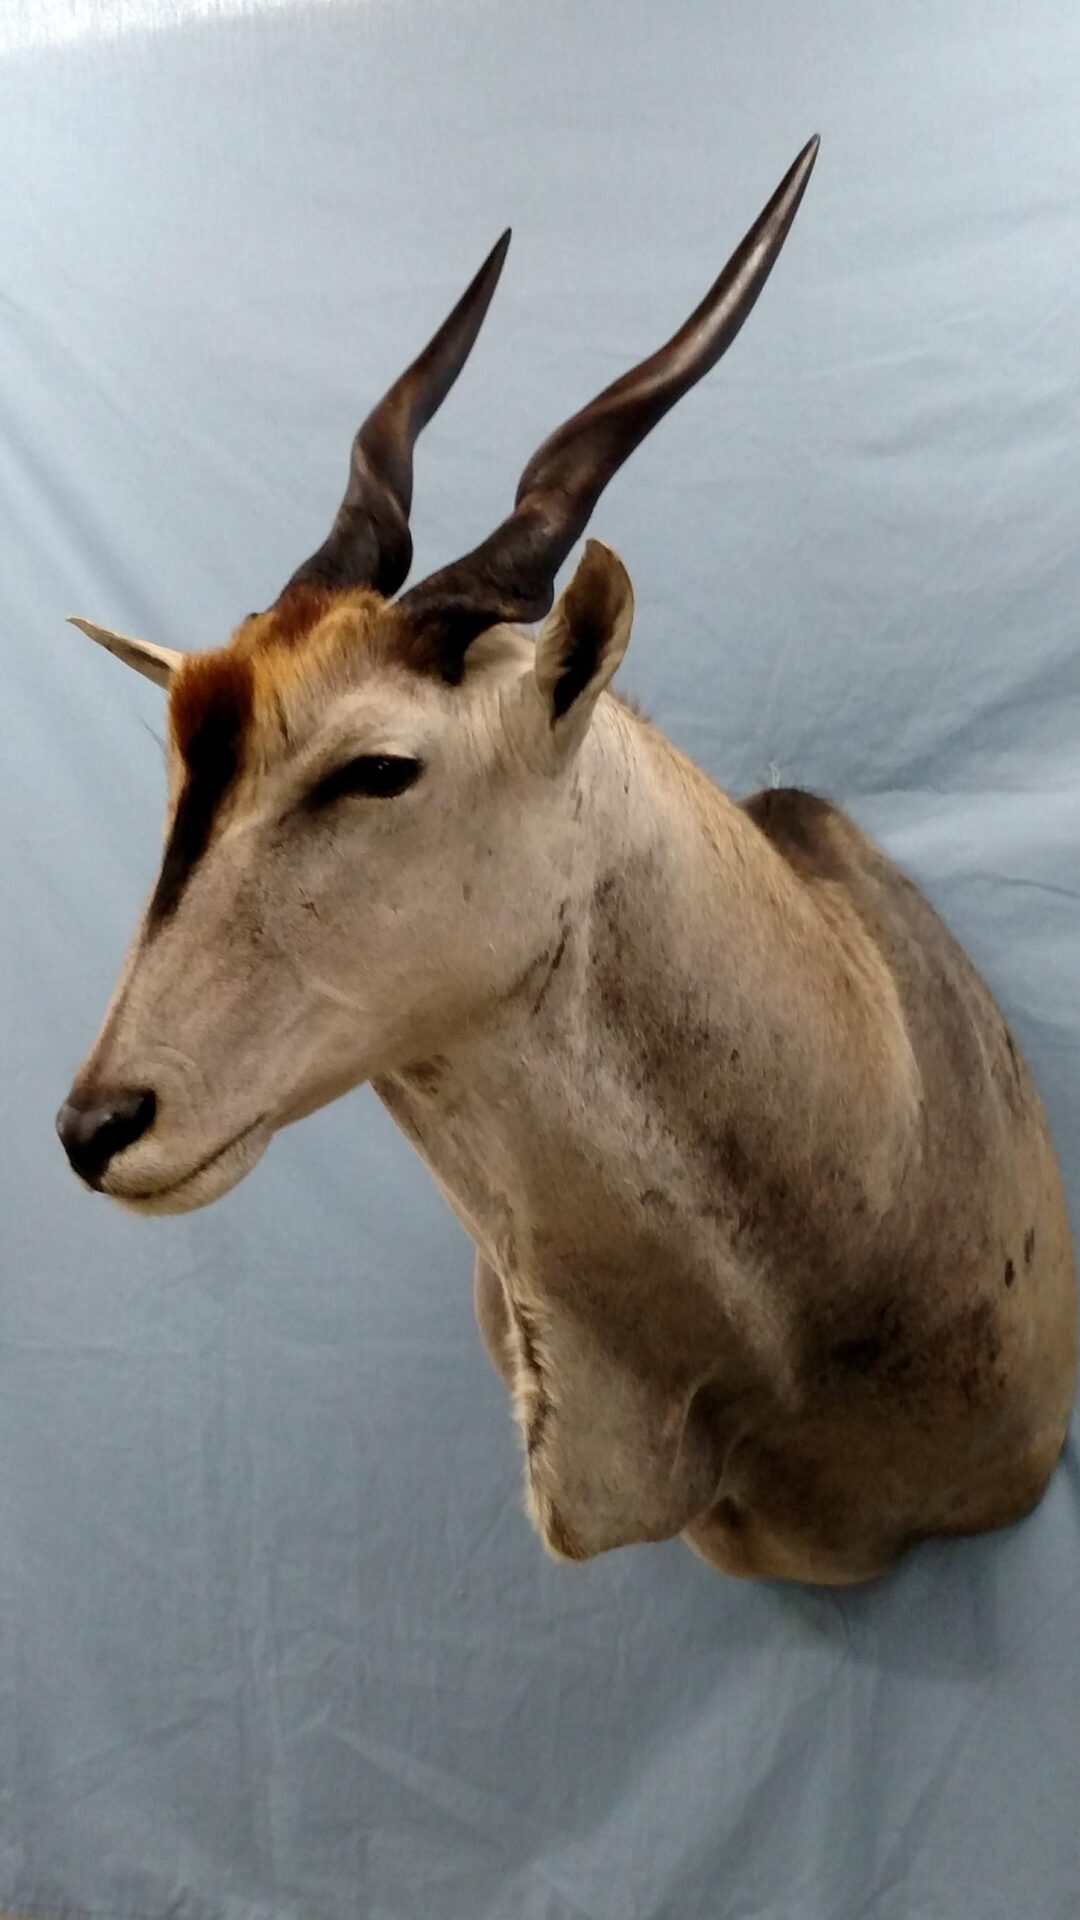 A horned deer taxidermy is available for sale